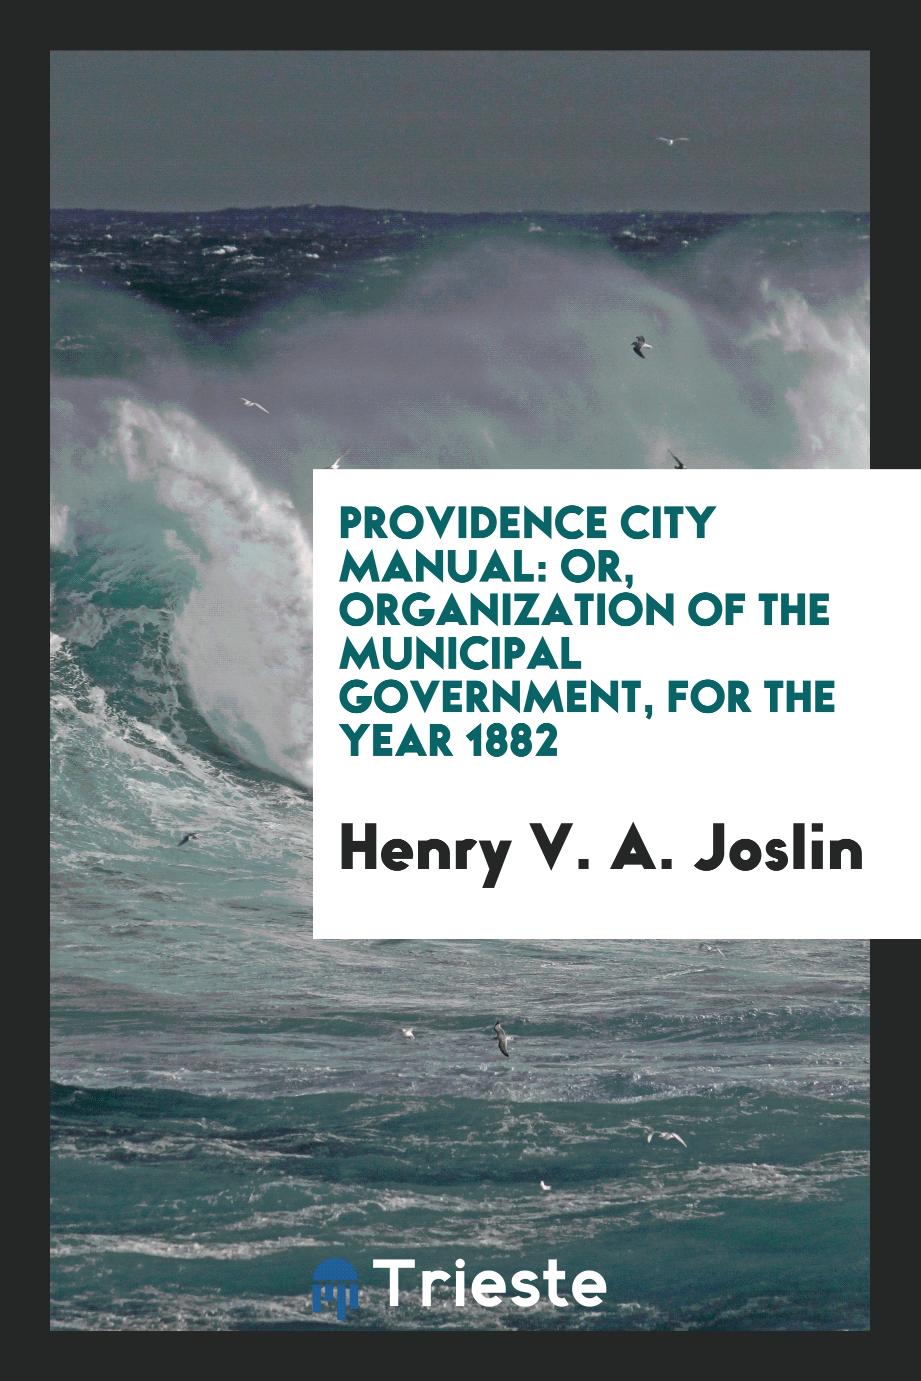 Providence City Manual: Or, Organization of the Municipal Government, for the Year 1882